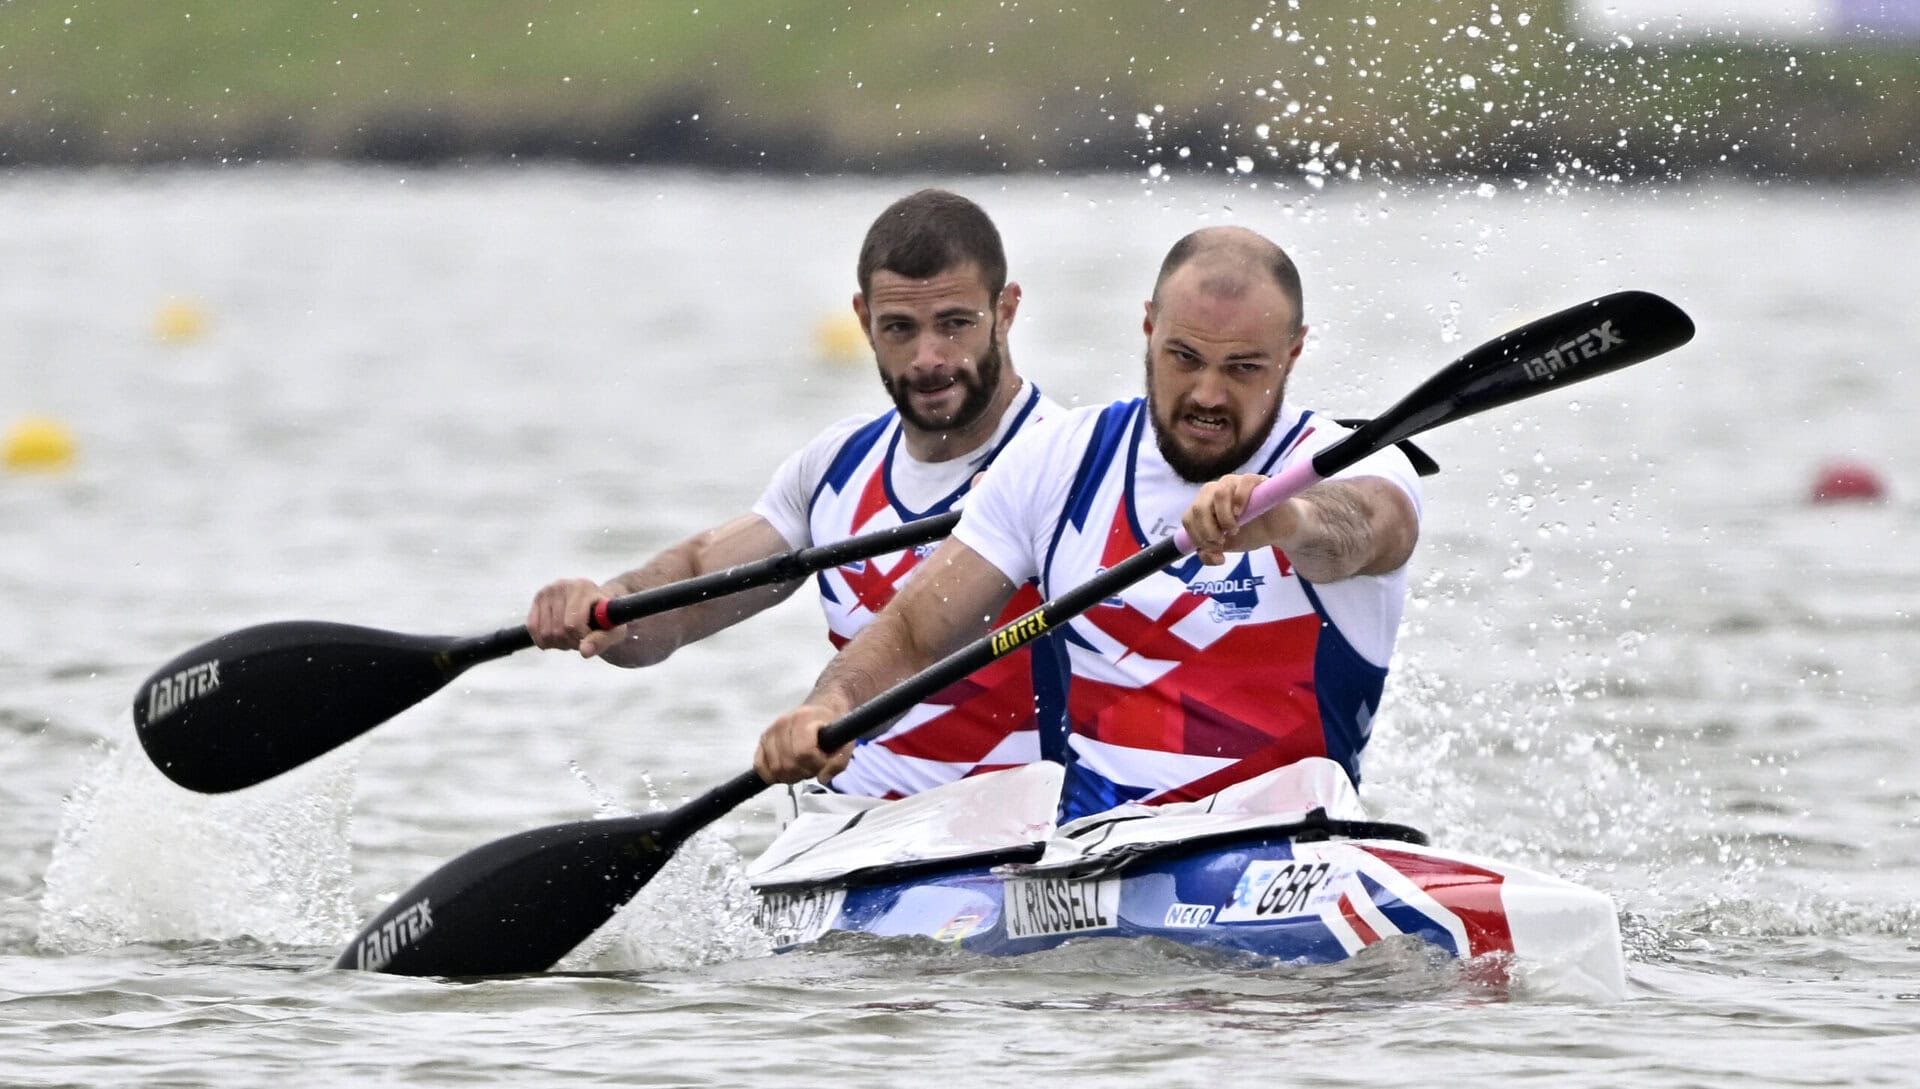 James Russell (GBR) and Trevor Thomson (GBR) during the European Olympic Qualifiers for Canoe Sprint in Szeged, Hungary..